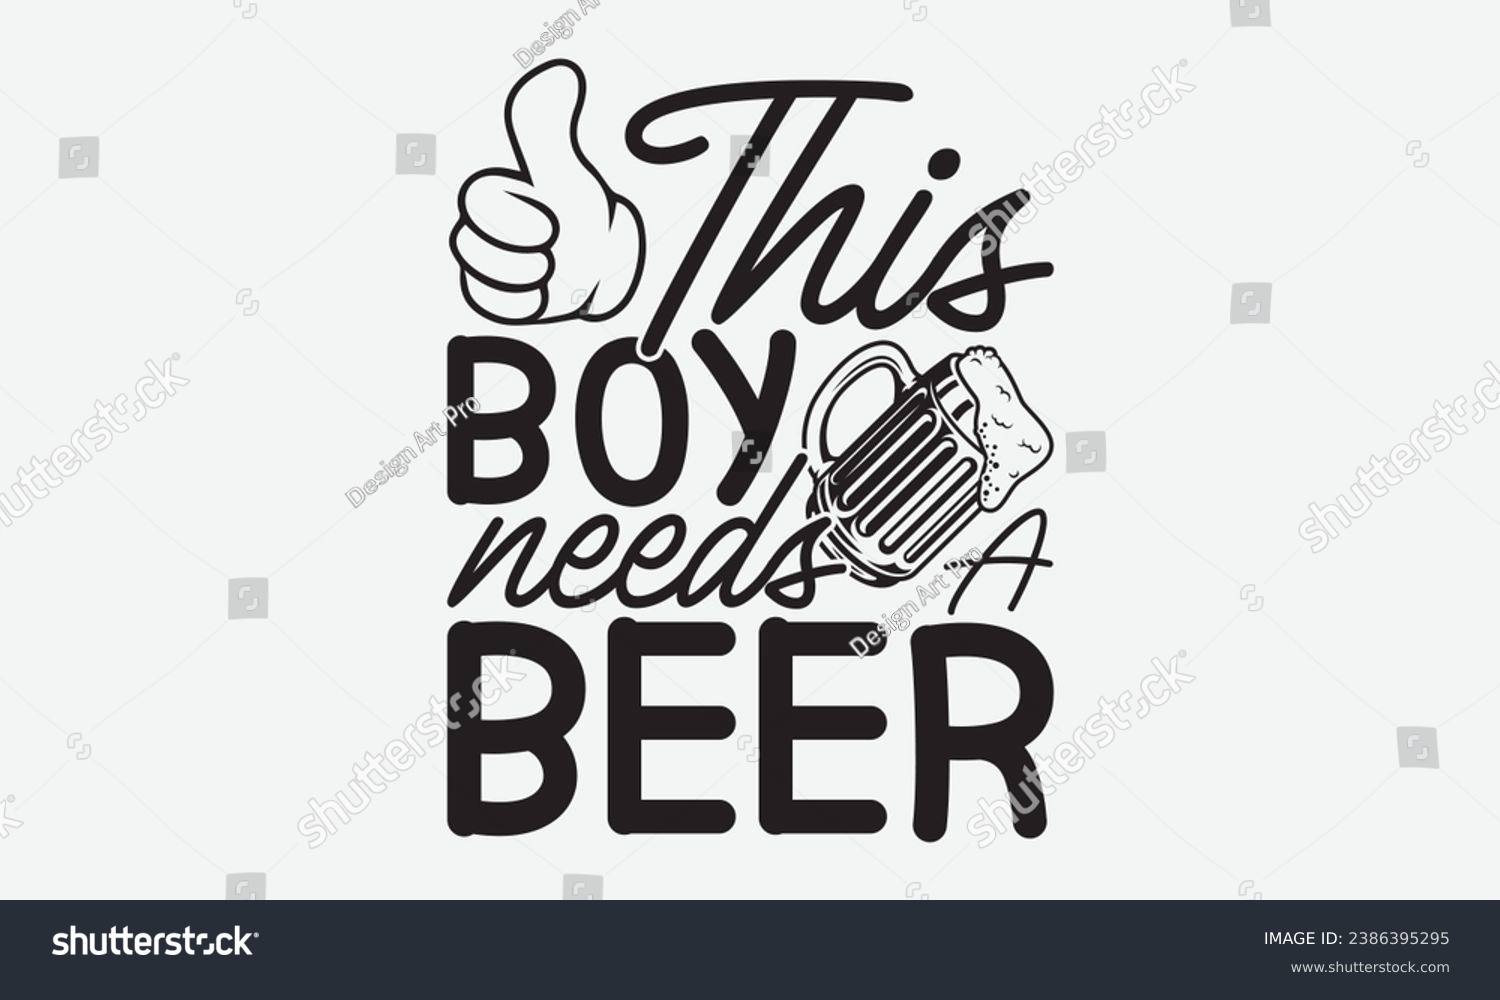 SVG of This Boy Needs A Beer -Beer T-Shirt Design, Modern Calligraphy, Illustration For Mugs, Hoodie, Bags, Posters, Vector Files Are Editable. svg